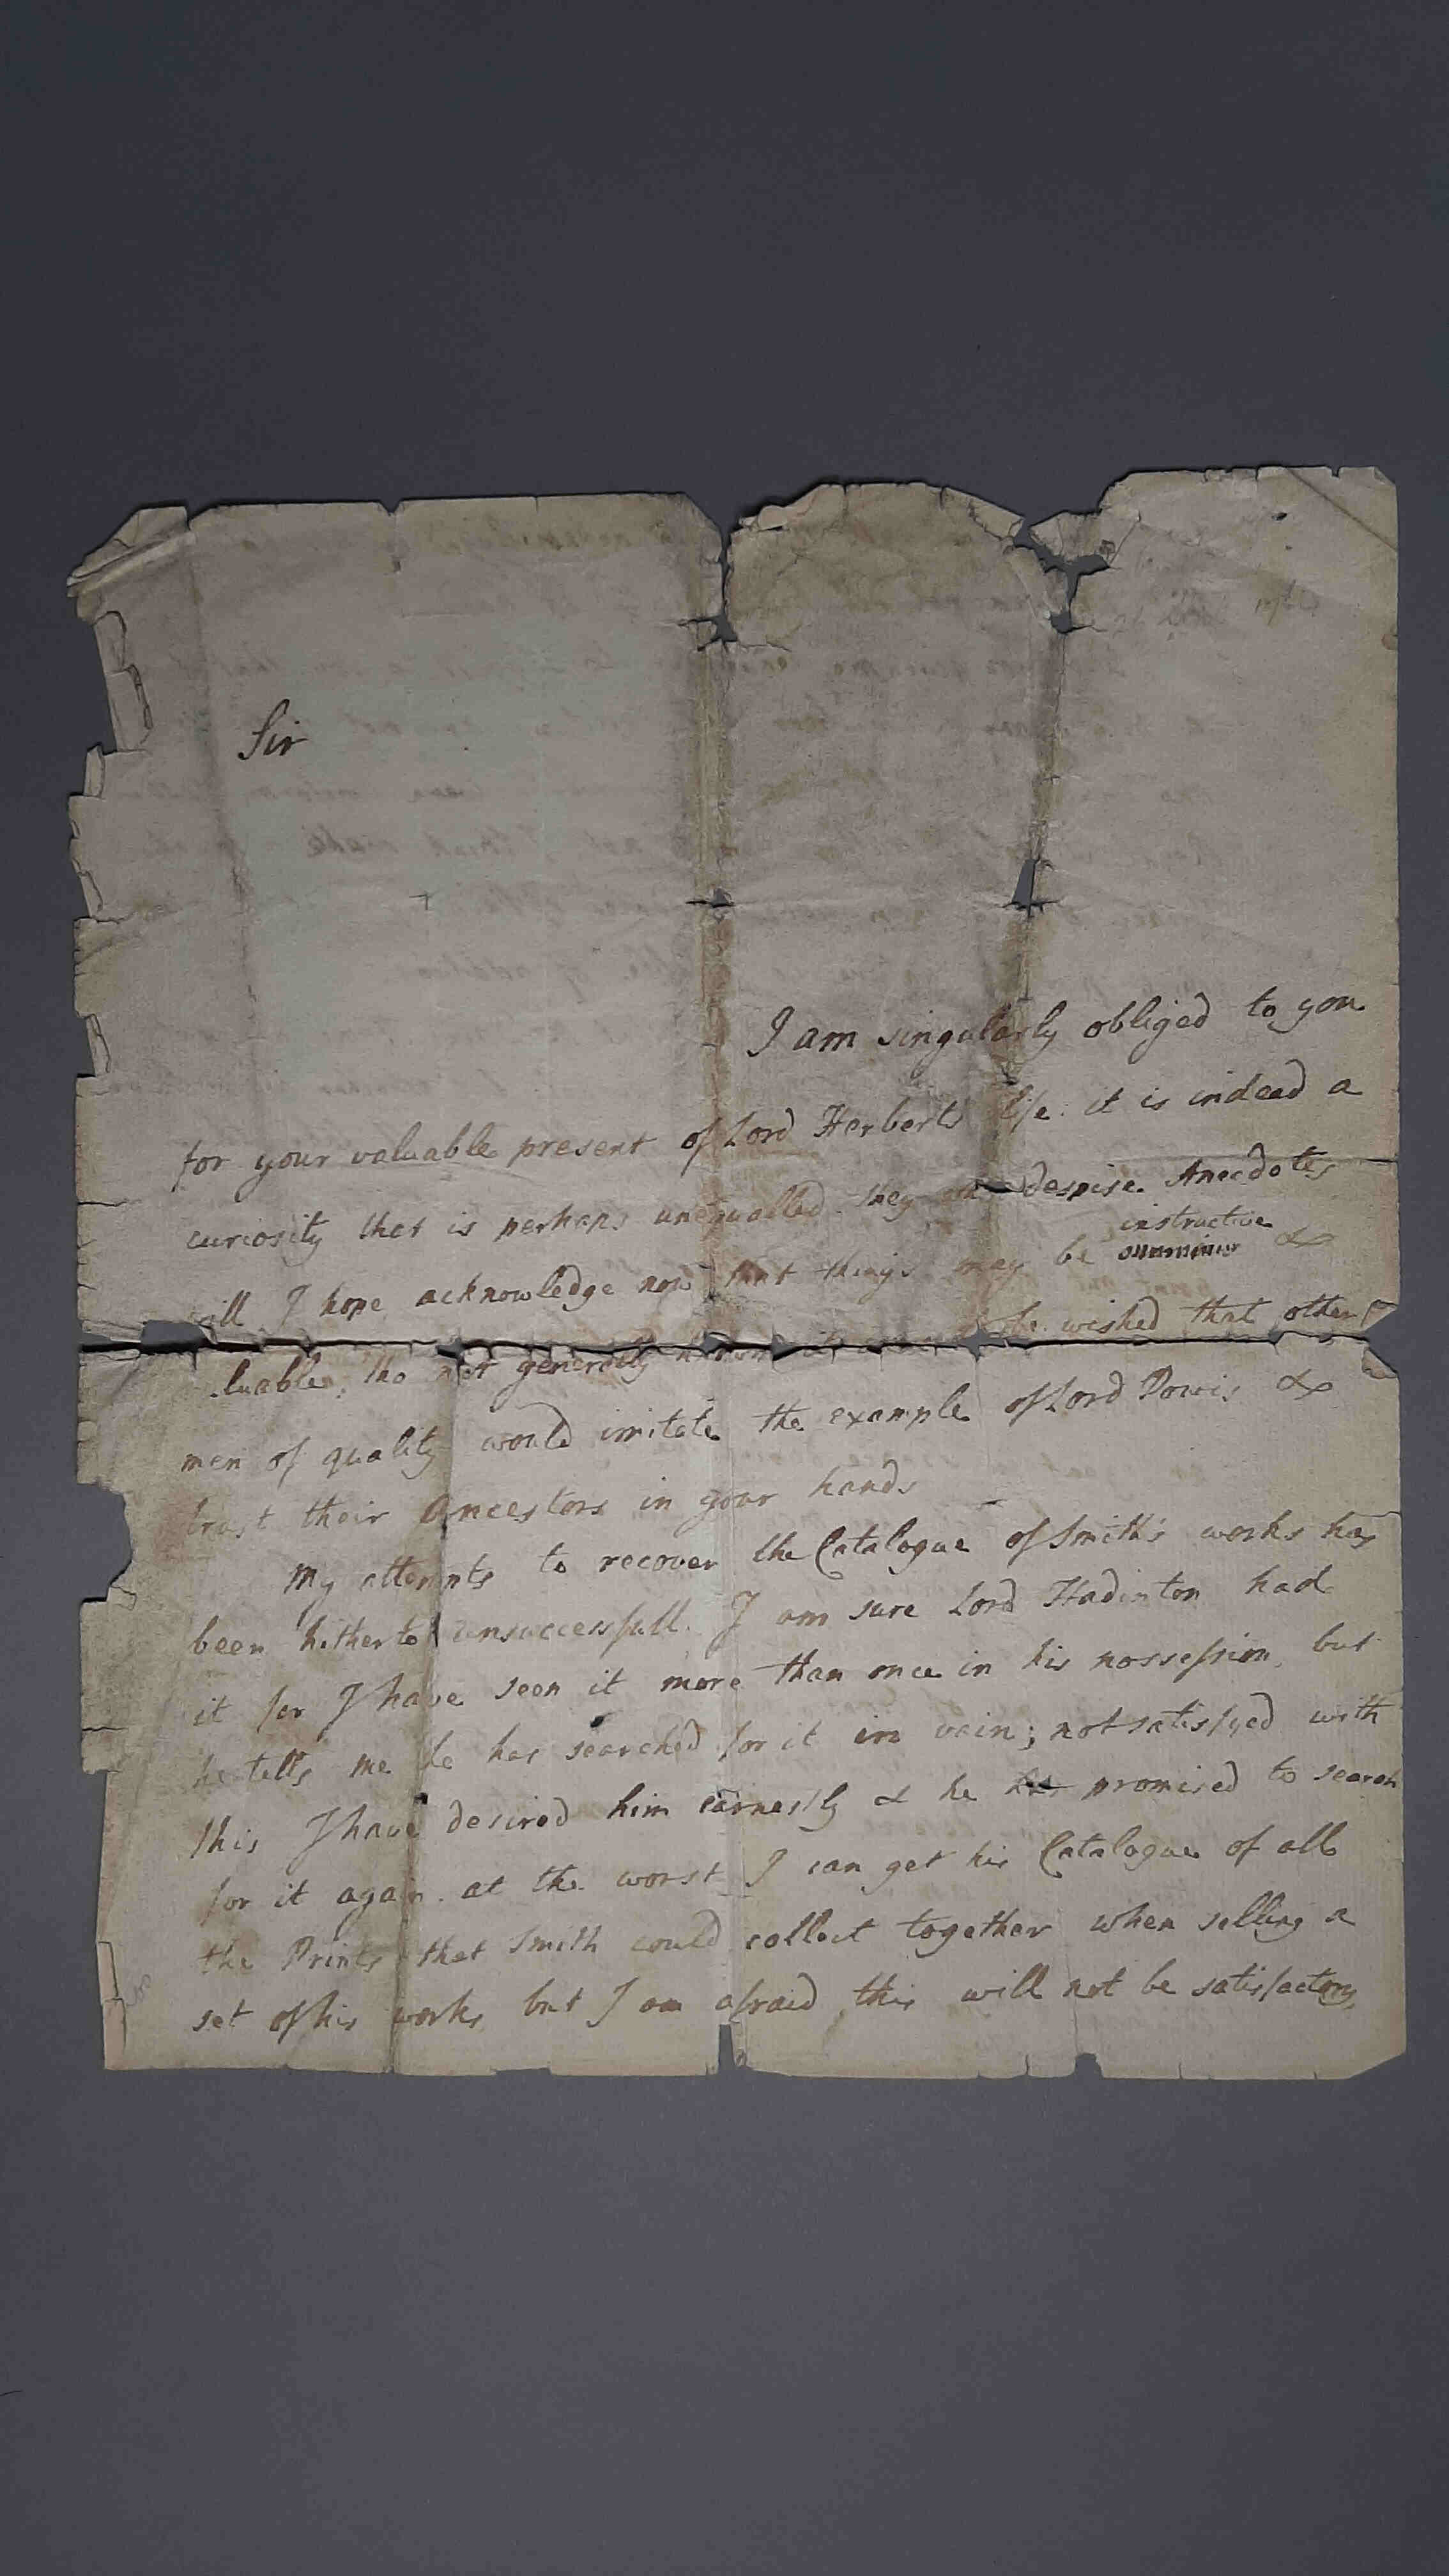 Historic document with structural damage